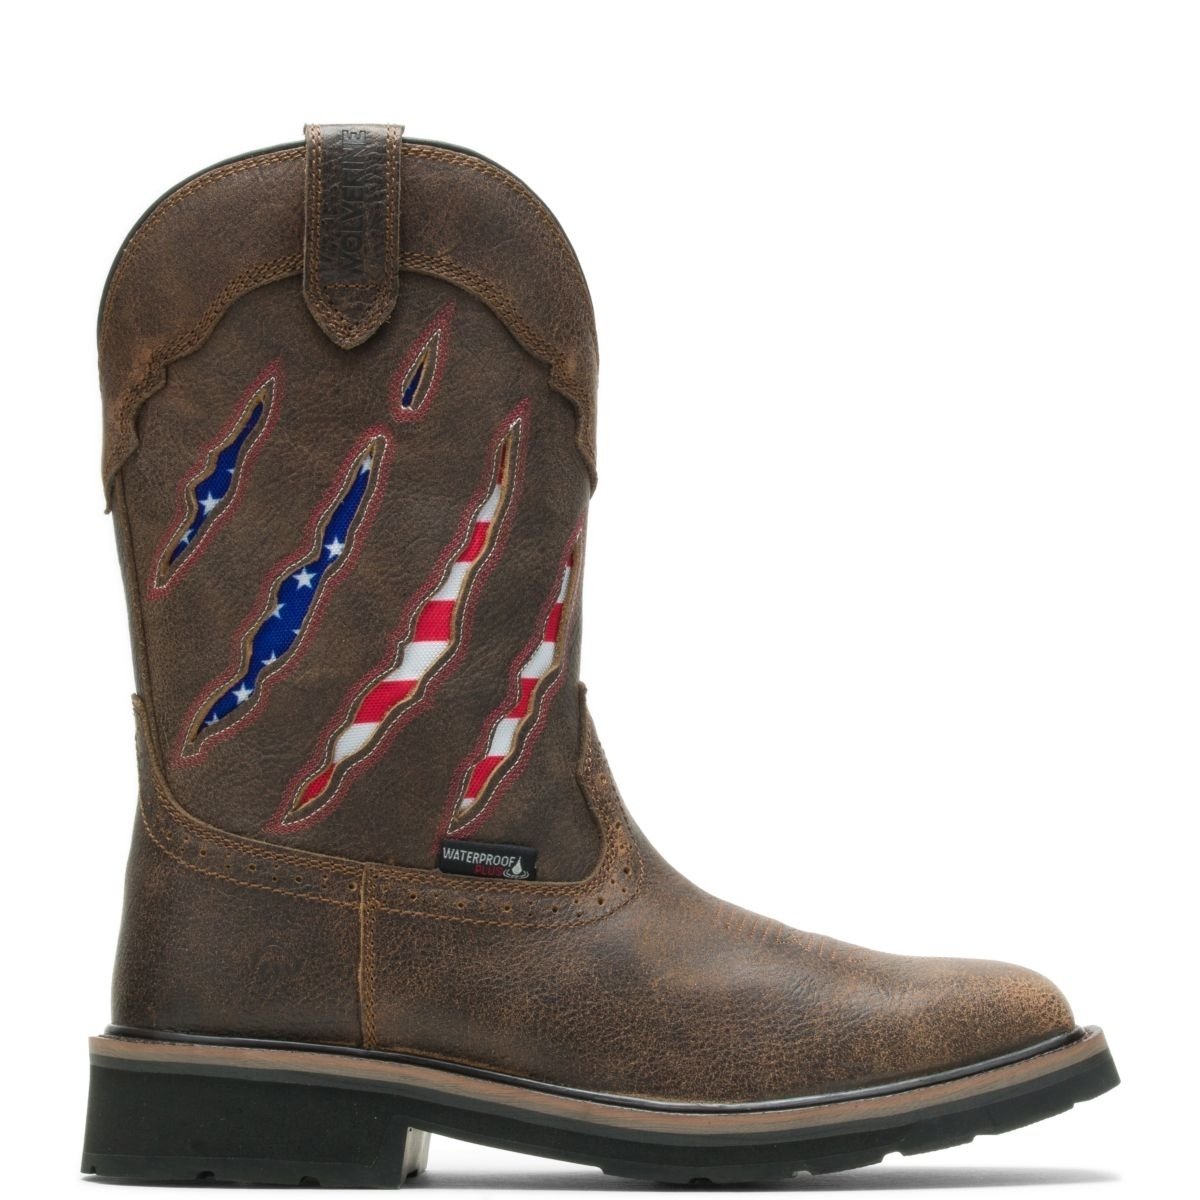 WOLVERINE Men's Rancher Claw Wellington Soft Toe Work Boot Brown/Flag - W200138 Flag/brown - Flag/brown, 12